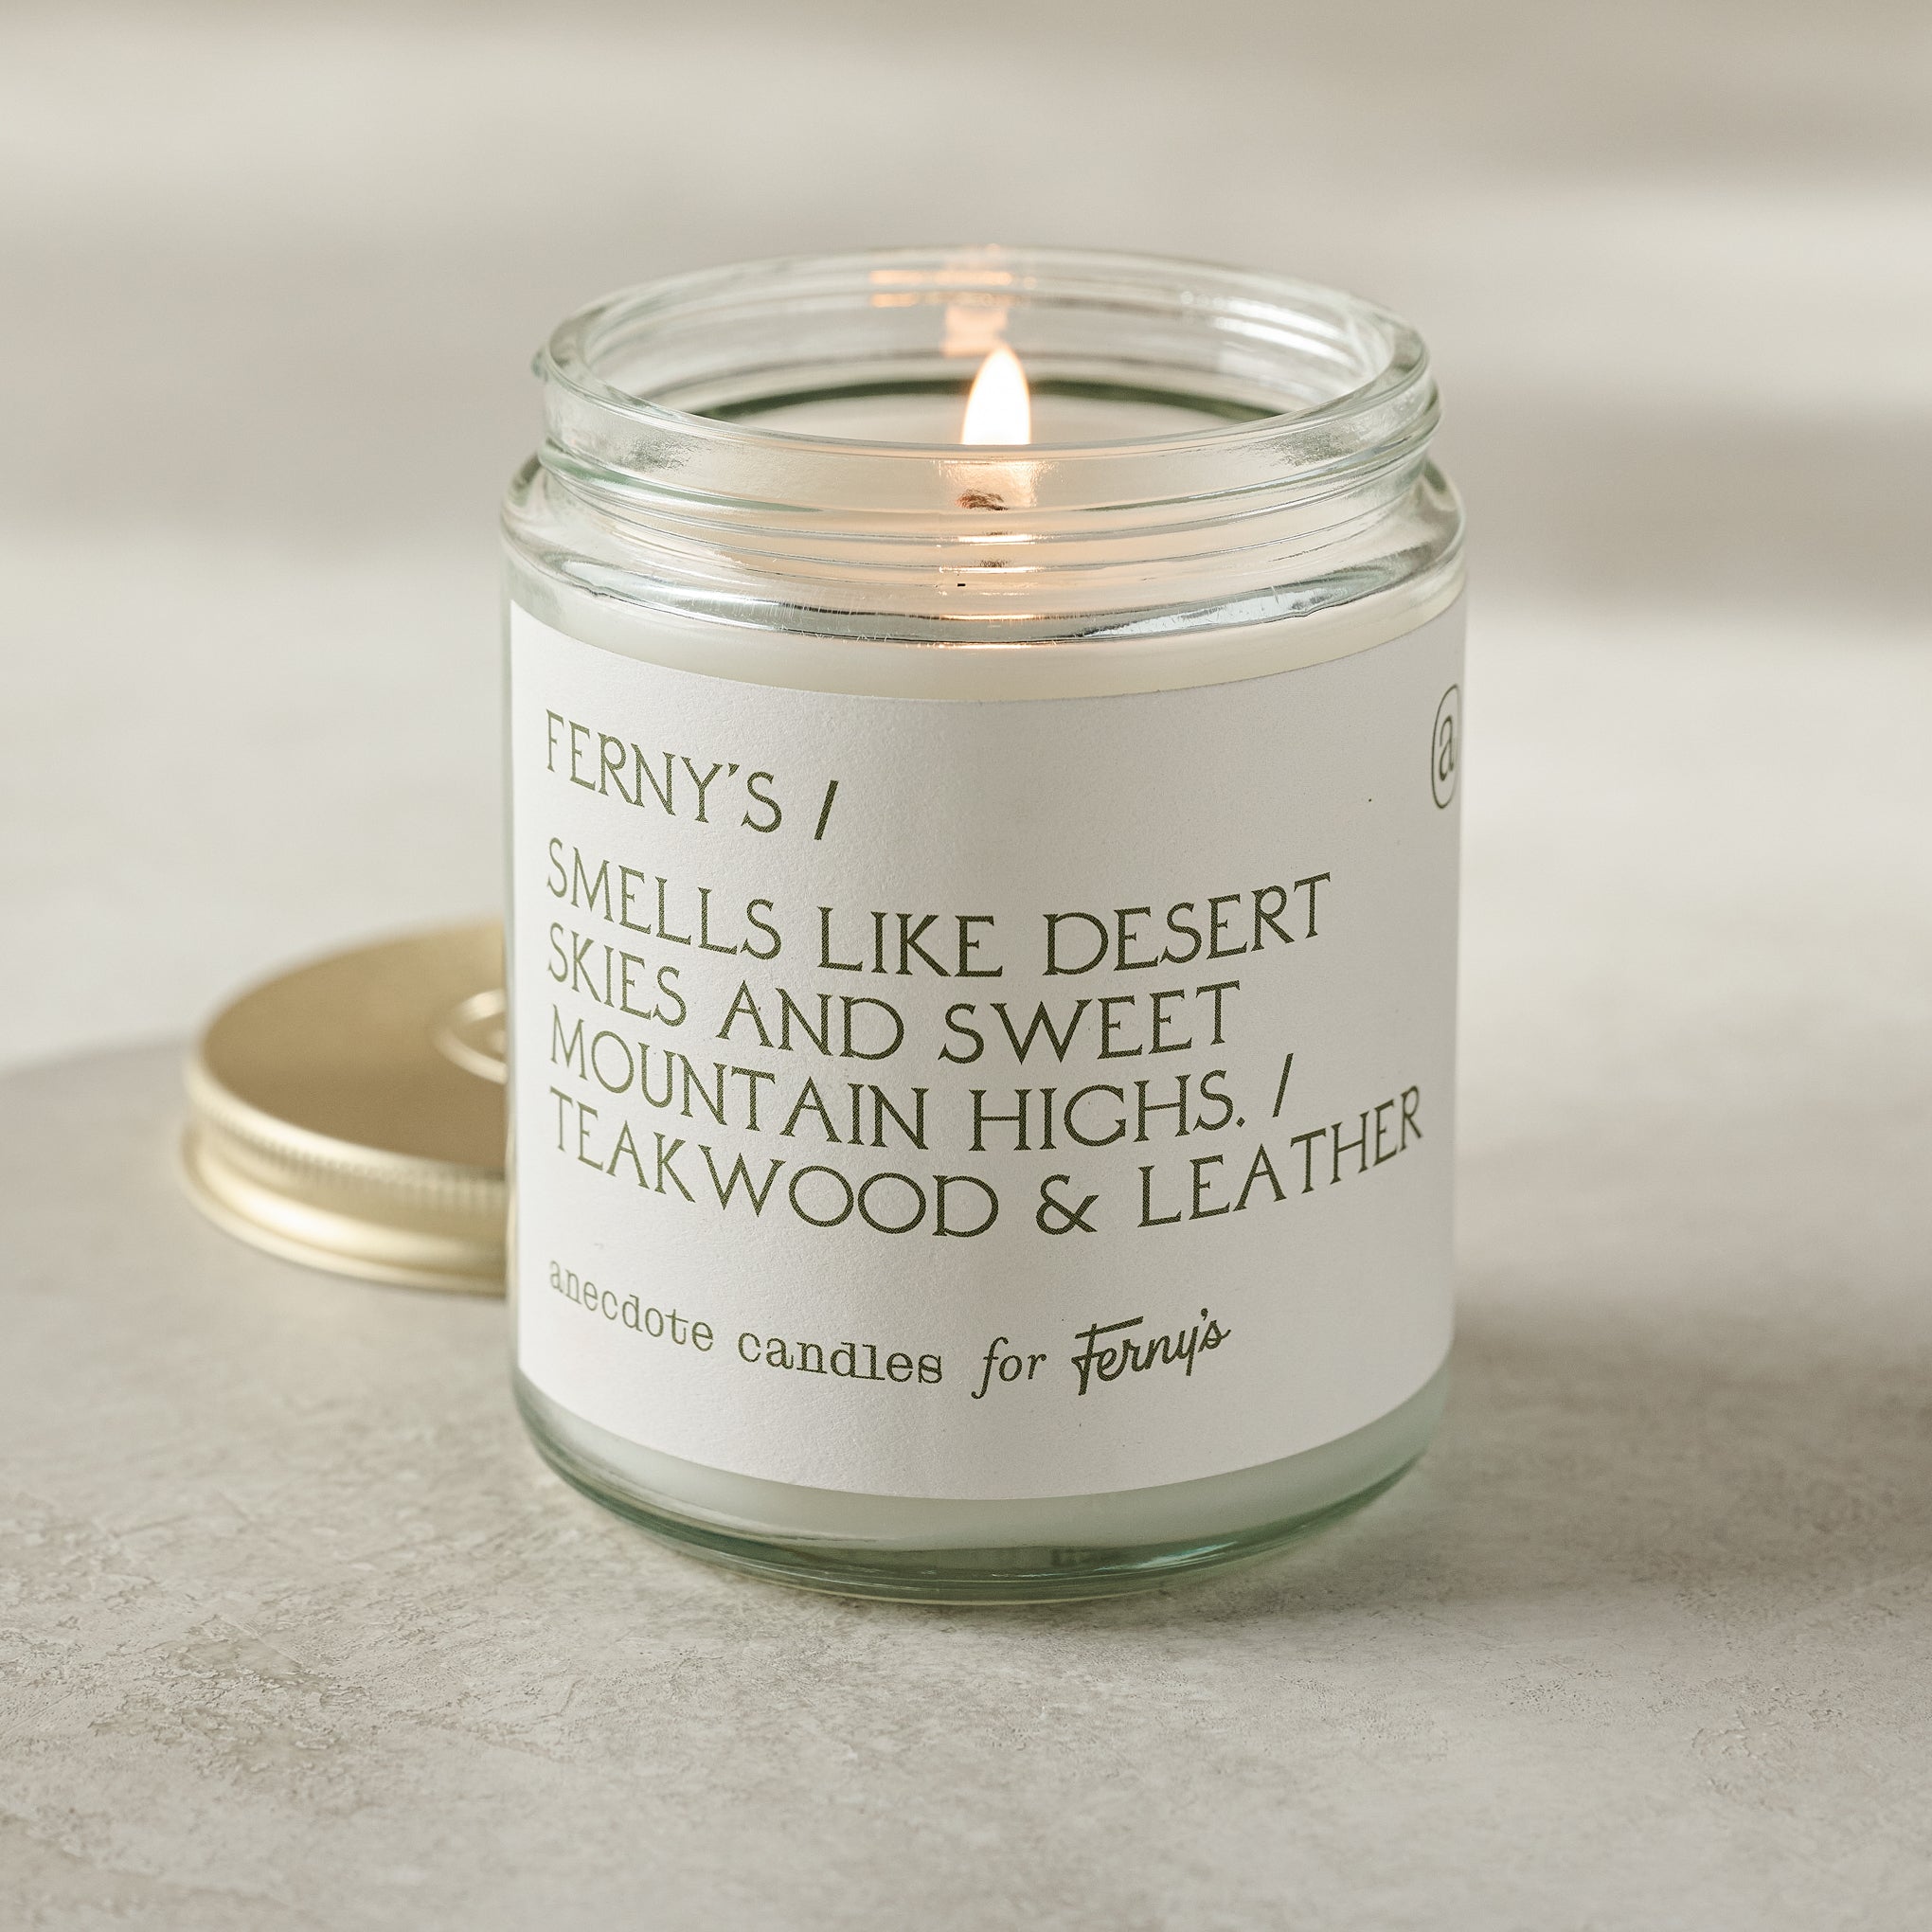 Ferny's Desert Skies & Mountain Highs Candle